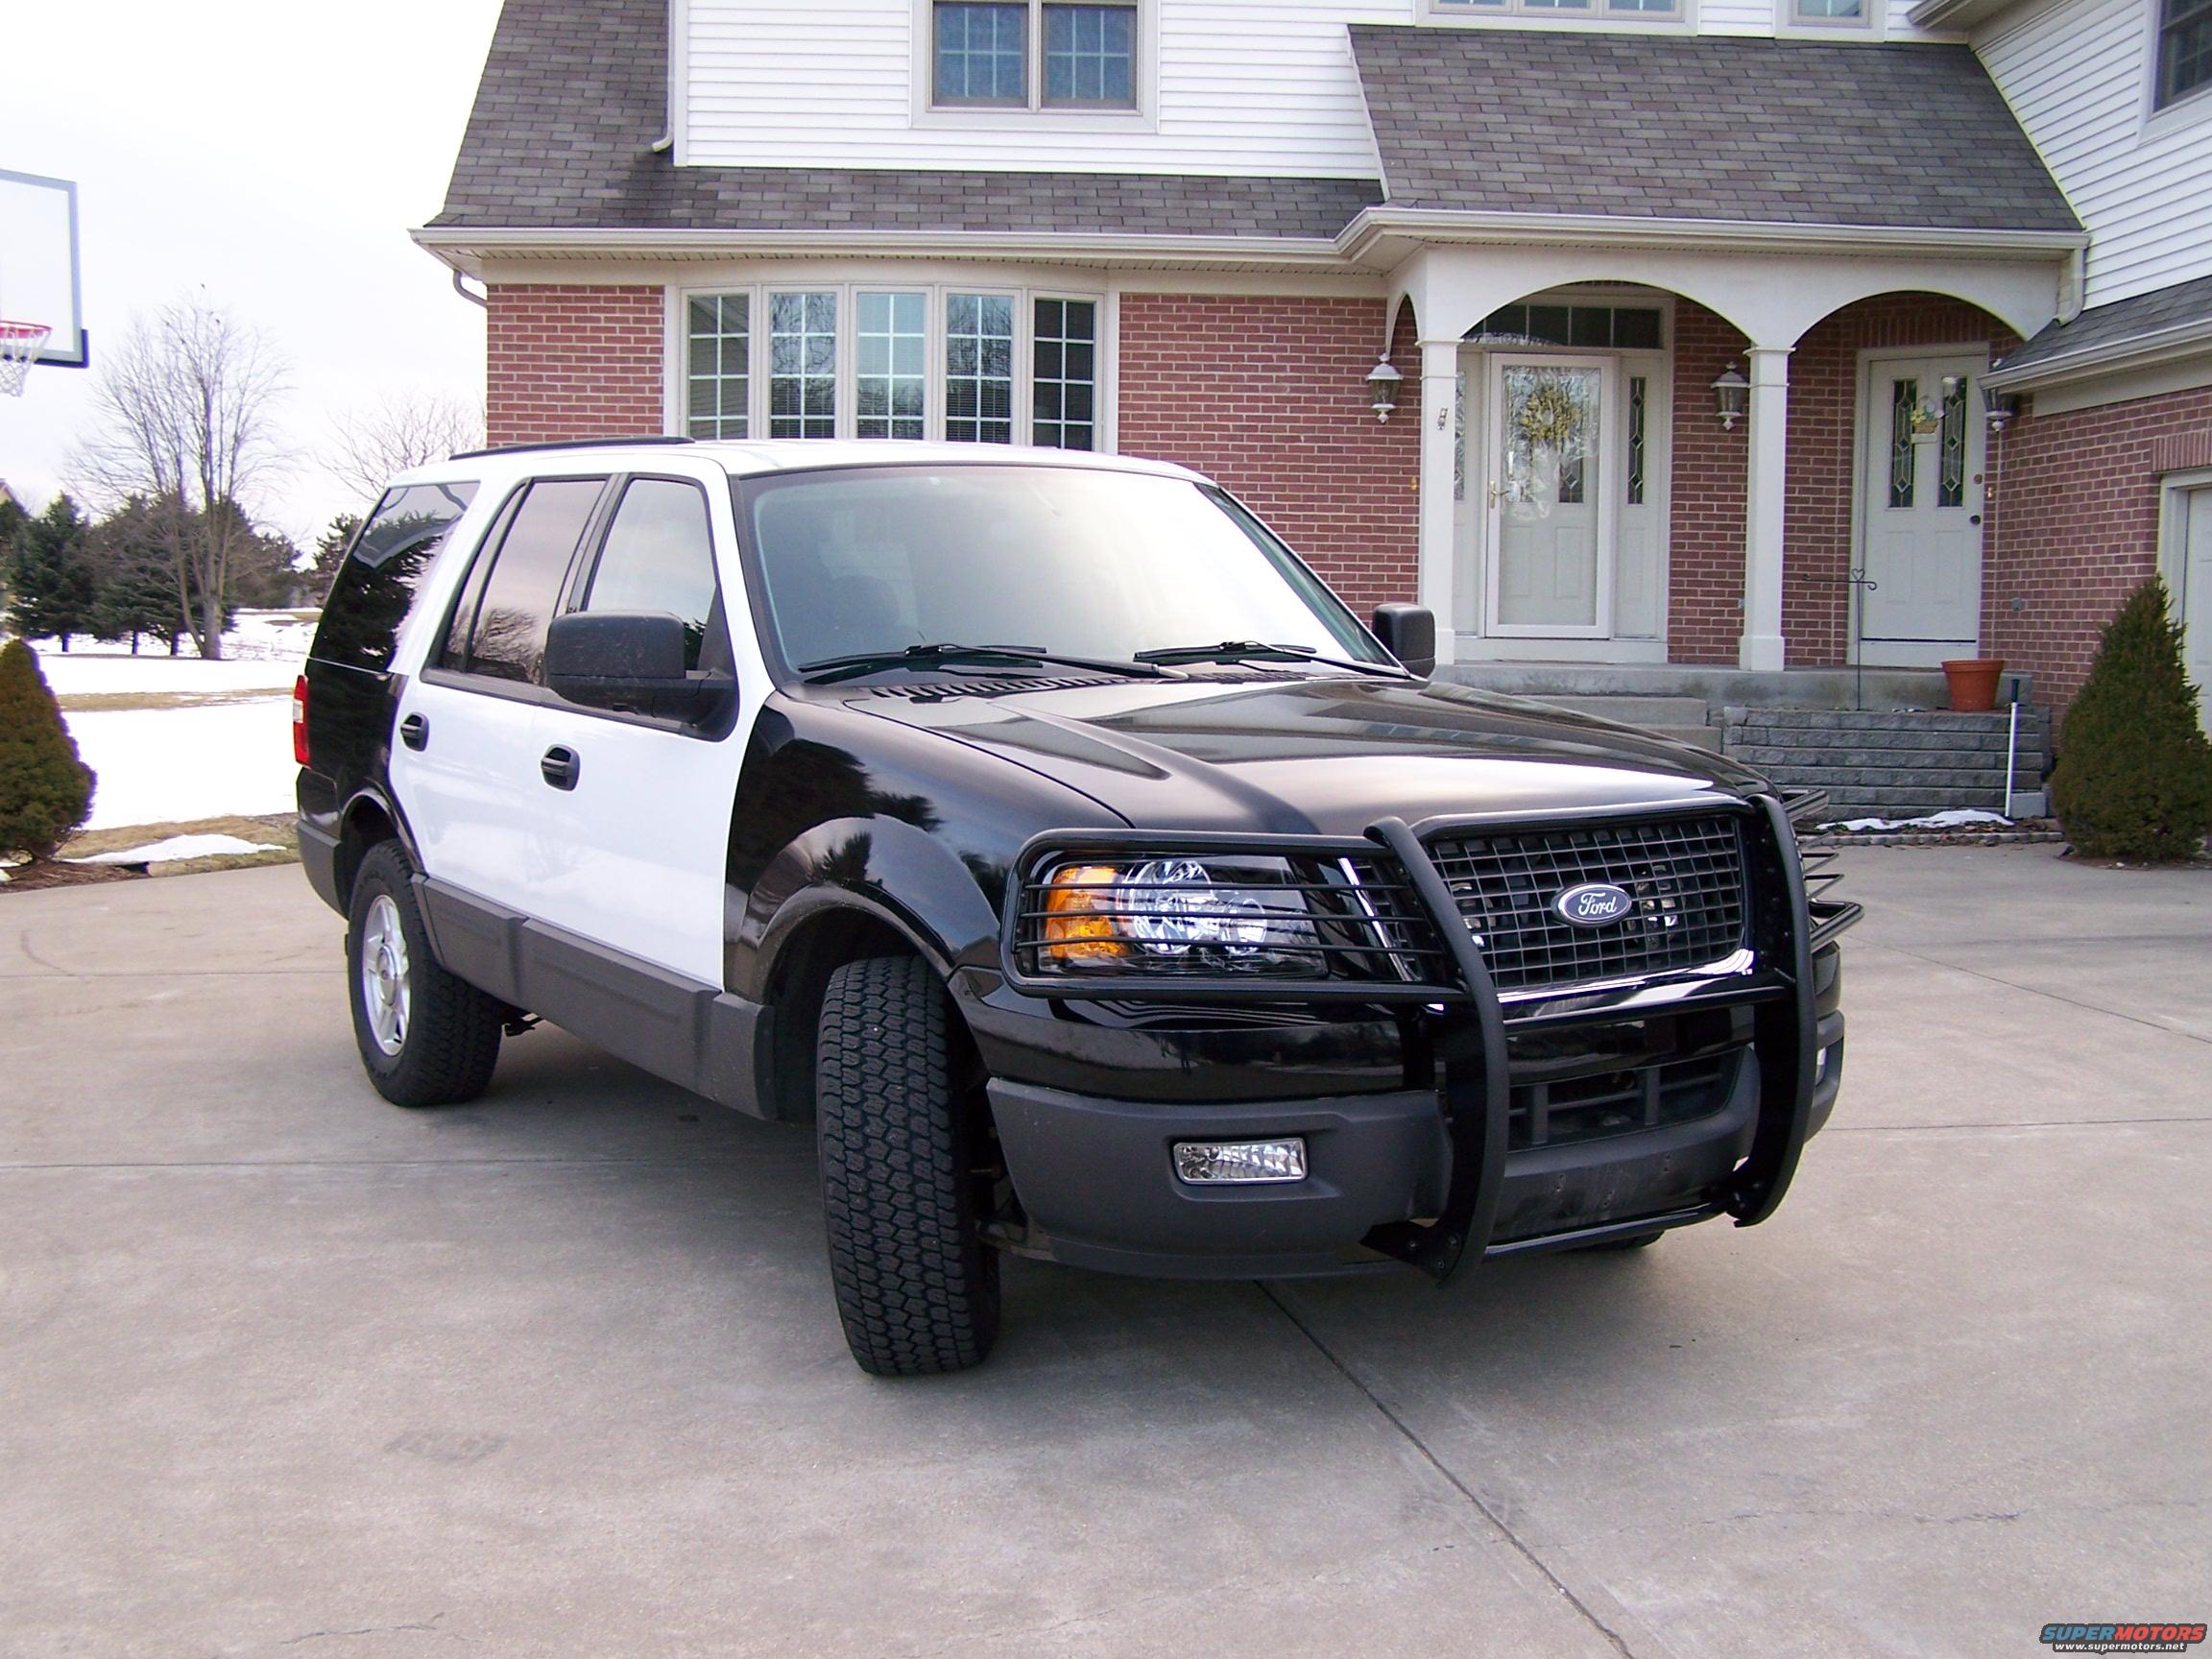 Push bumper for ford expedition #8